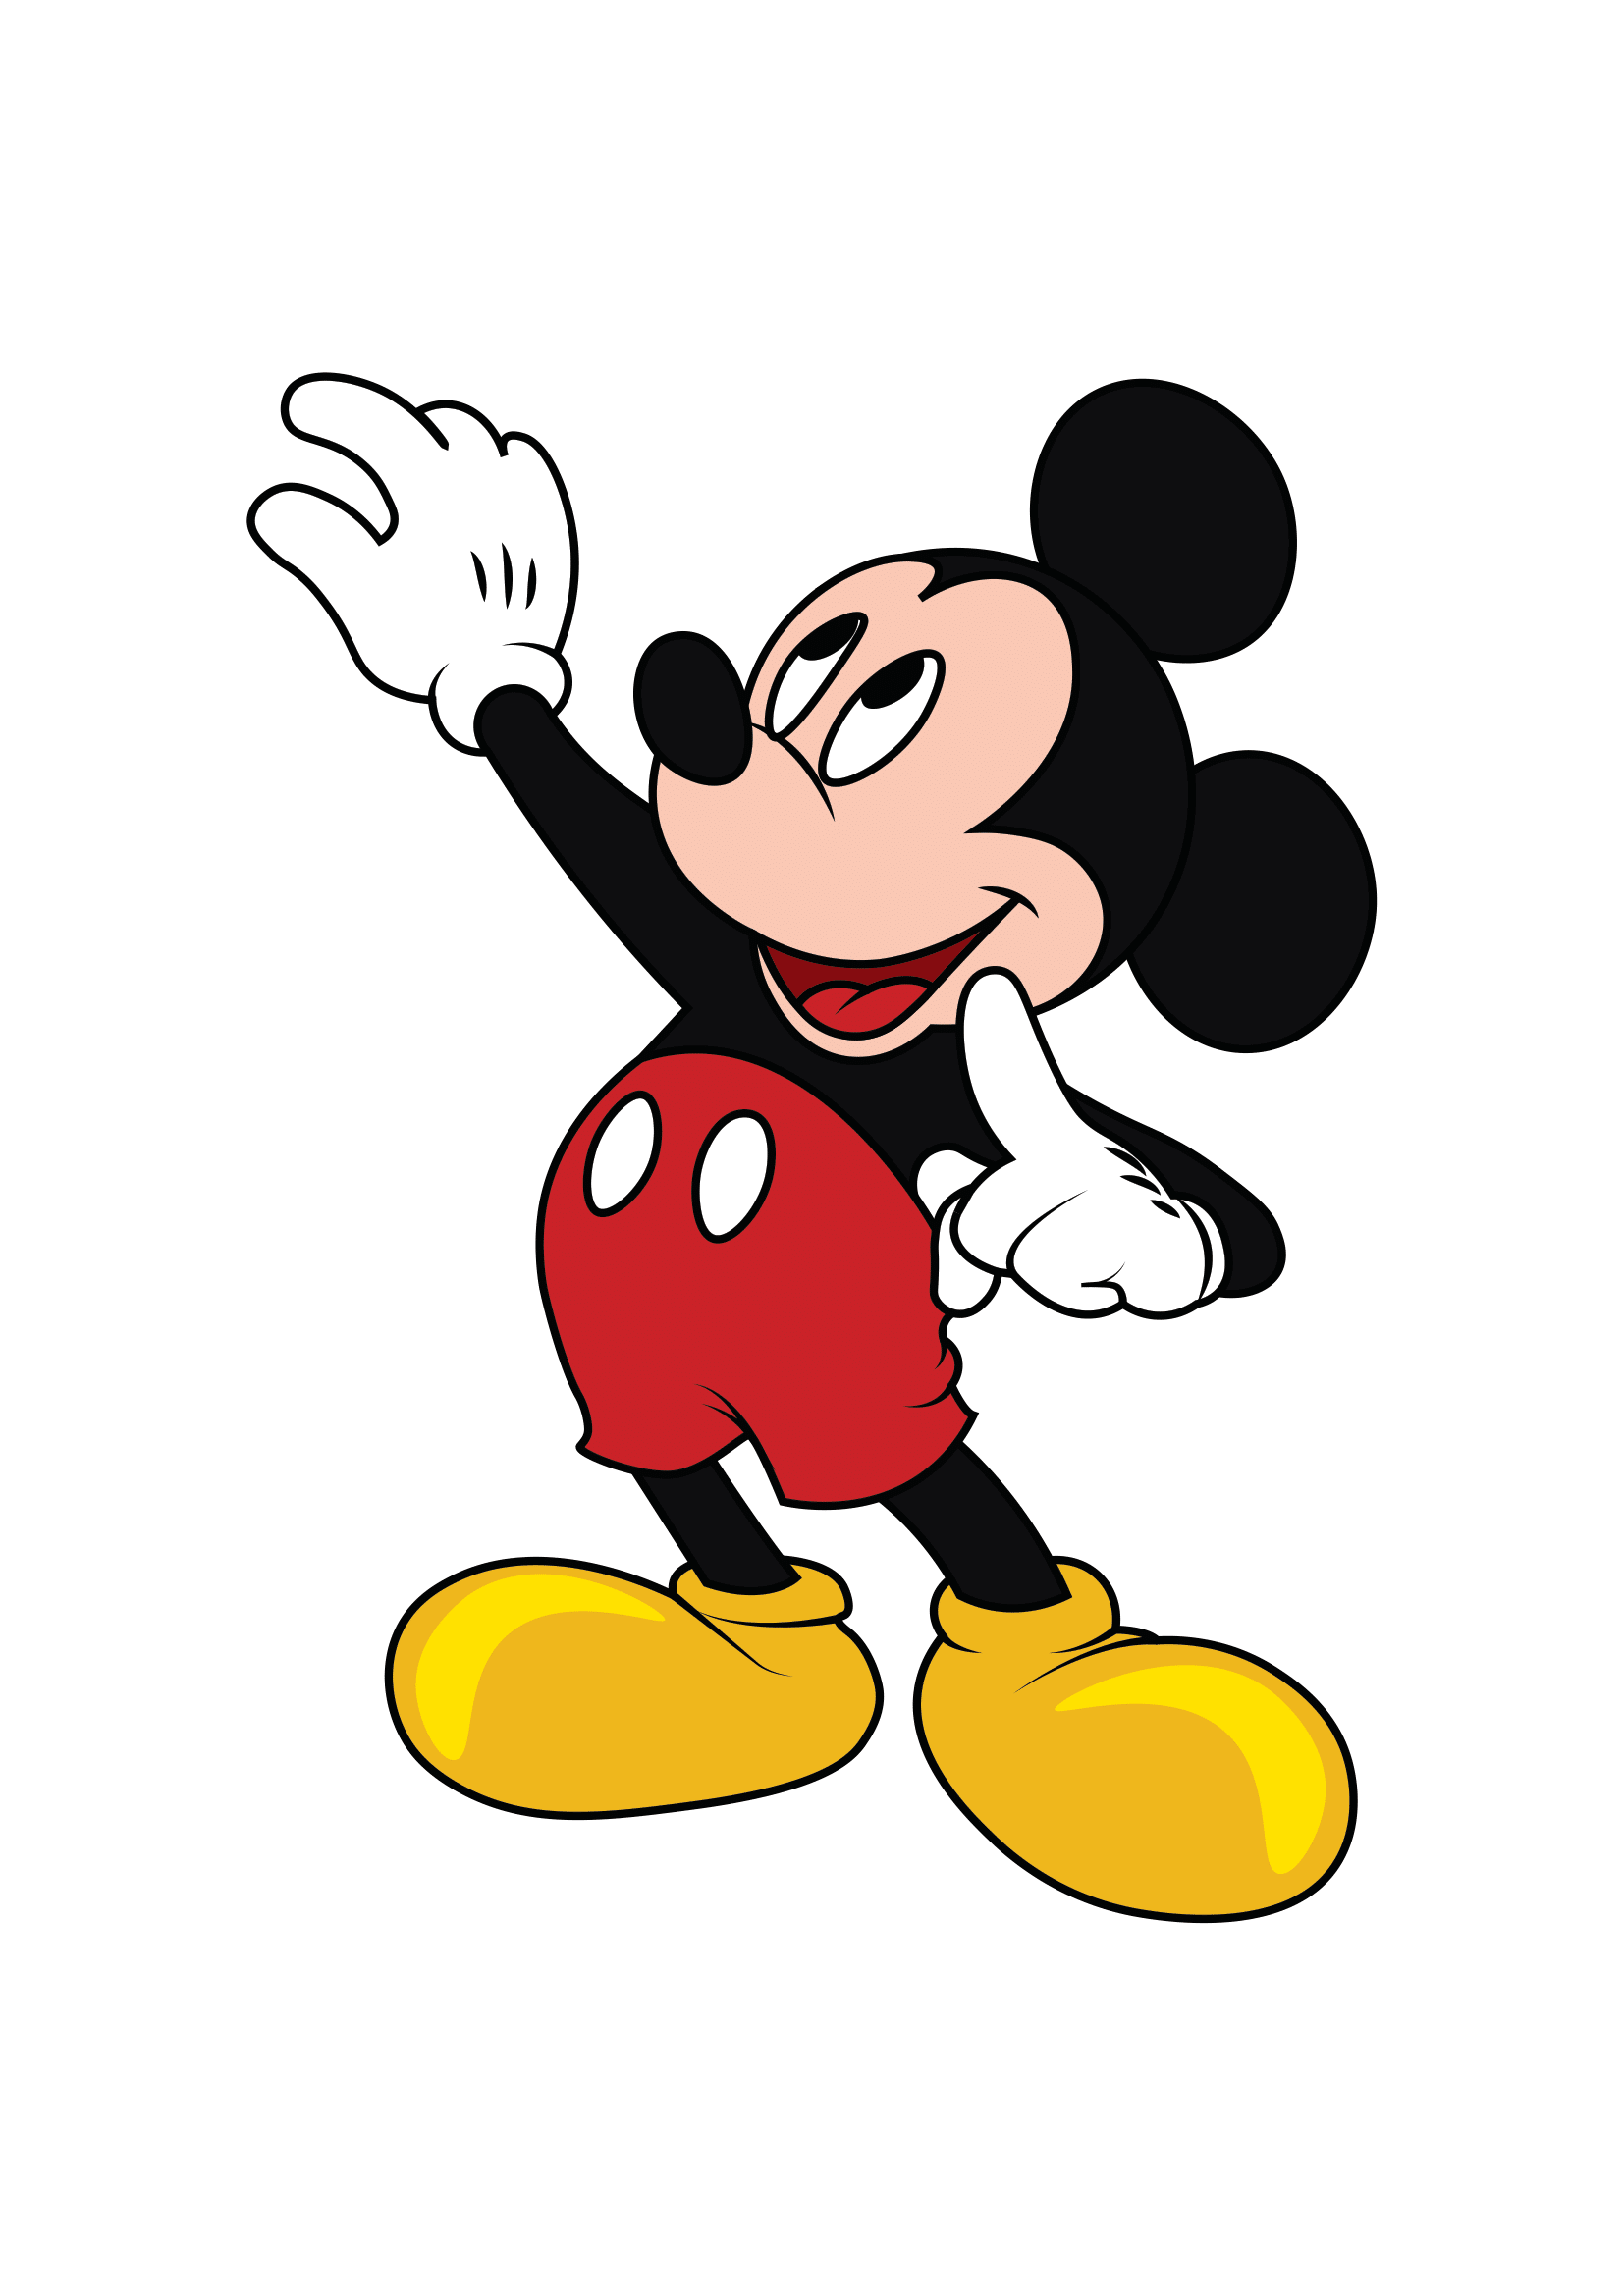 How to Draw Mickey Mouse Step by Step Printable